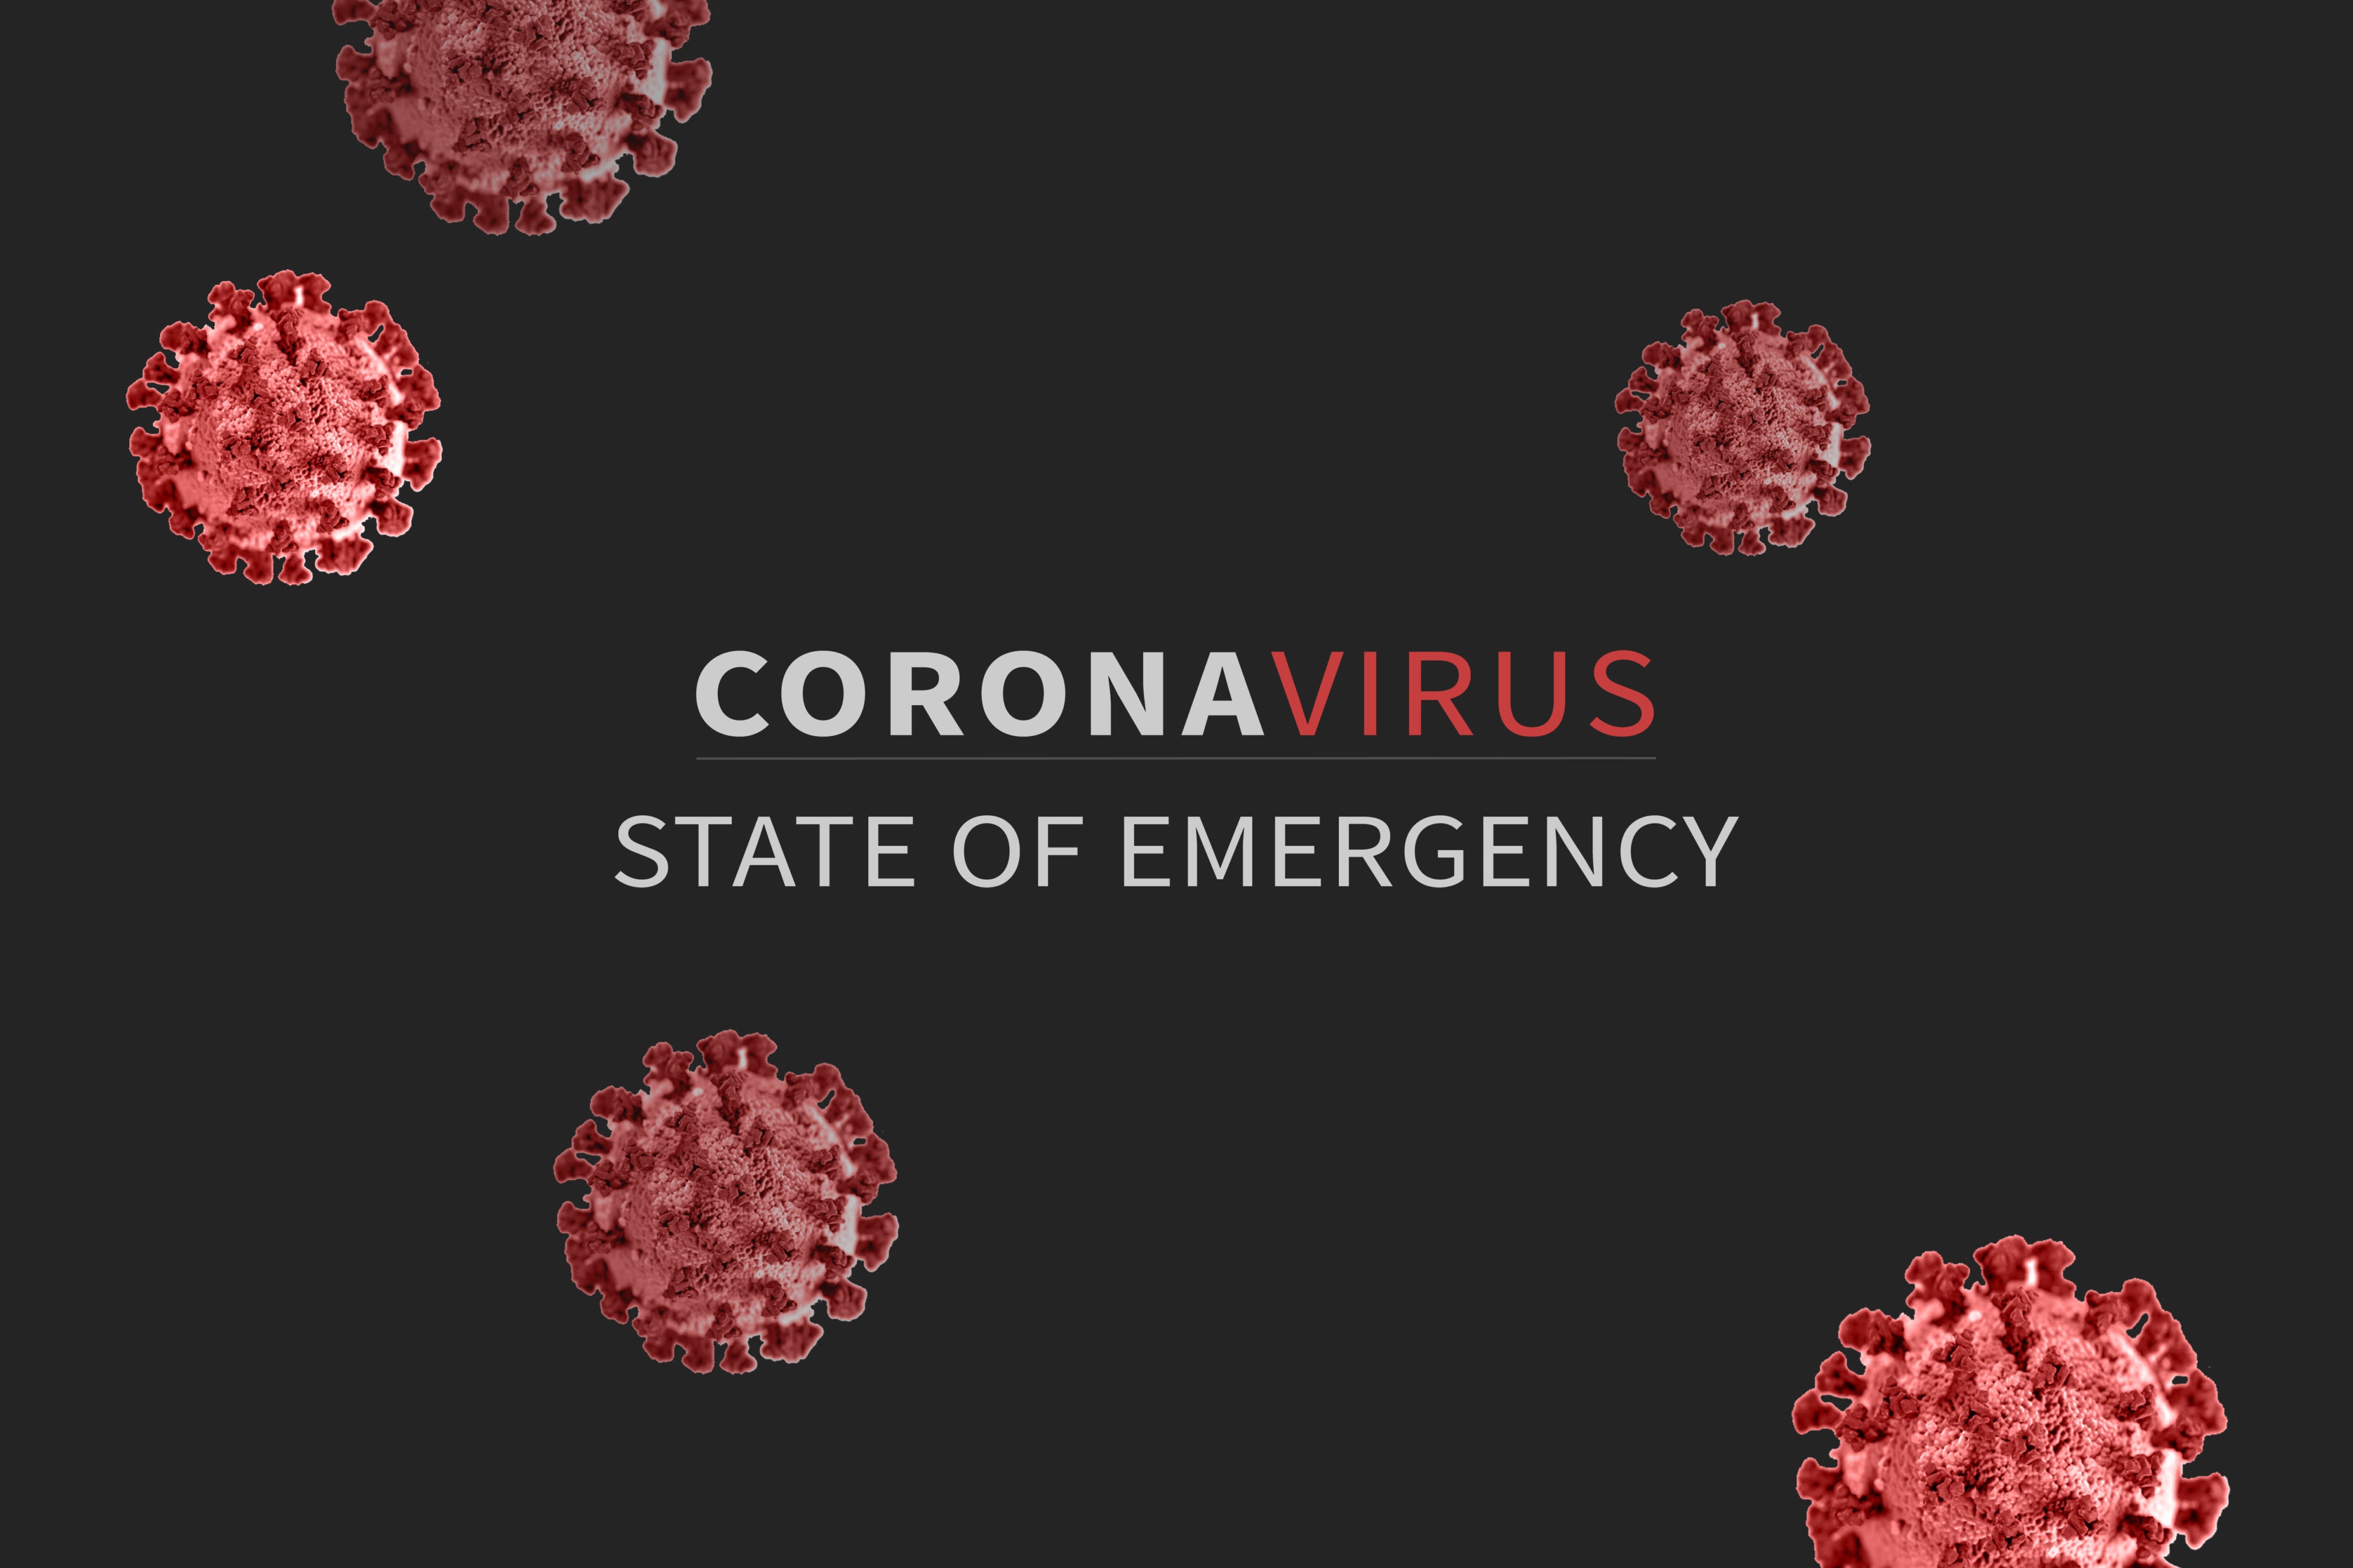 Coronavirus Covid-19 State of Emergency large graphic design with black/gray background.